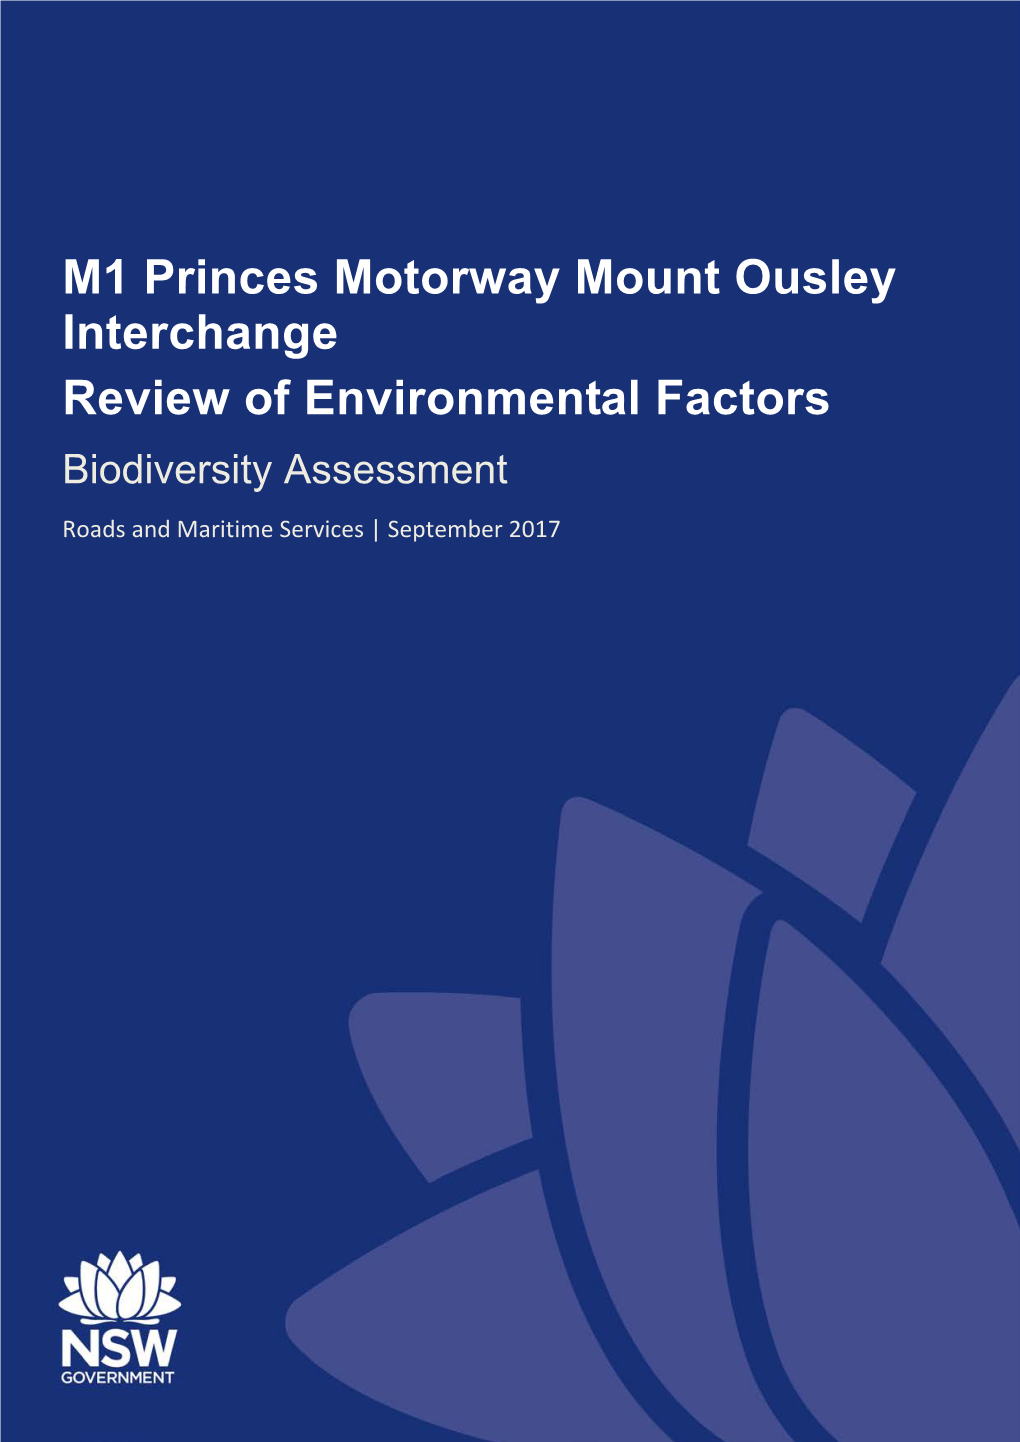 M1 Princes Motorway Mount Ousley Interchange Review of Environmental Factors Biodiversity Assessment Roads and Maritime Services | September 2017